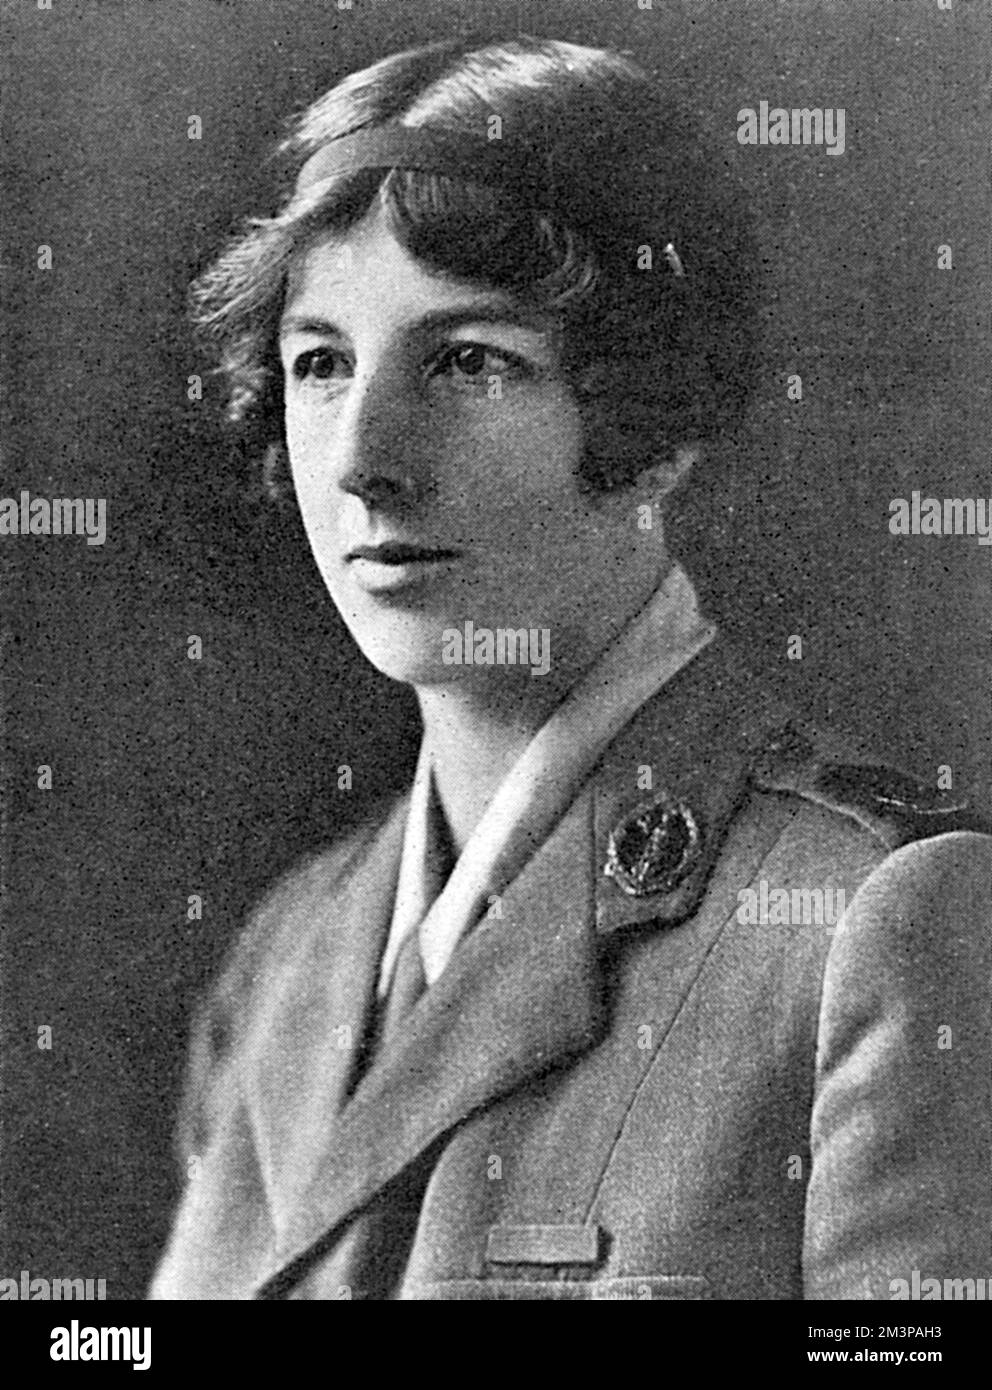 Lady Londonderry, formerly the Hon. Edith Chaplin, pictured in 1918 when she was President of the Women's War Services Legion (previously known as the Women's Legion) which provided military cooks and motor drivers for the War Office. She was awarded the Order of the Dame of the British Empire for her work during the war.      Date: 1918 Stock Photo